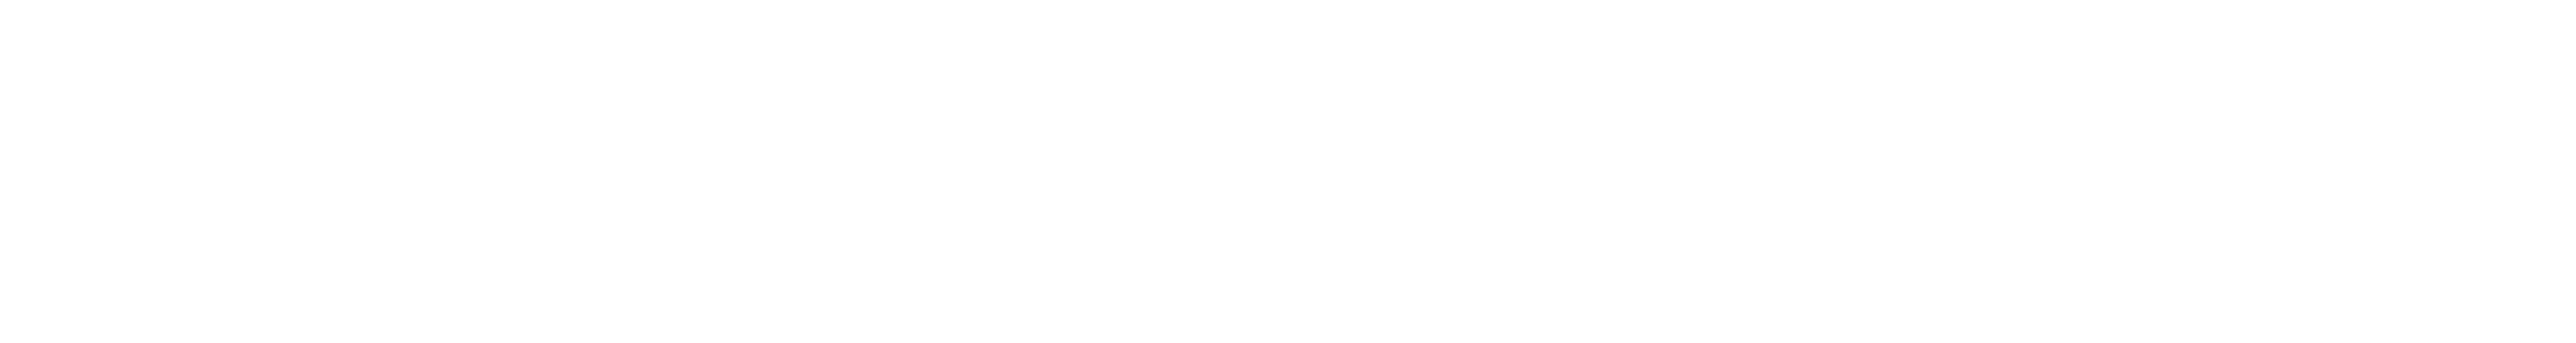 dotted grid lines